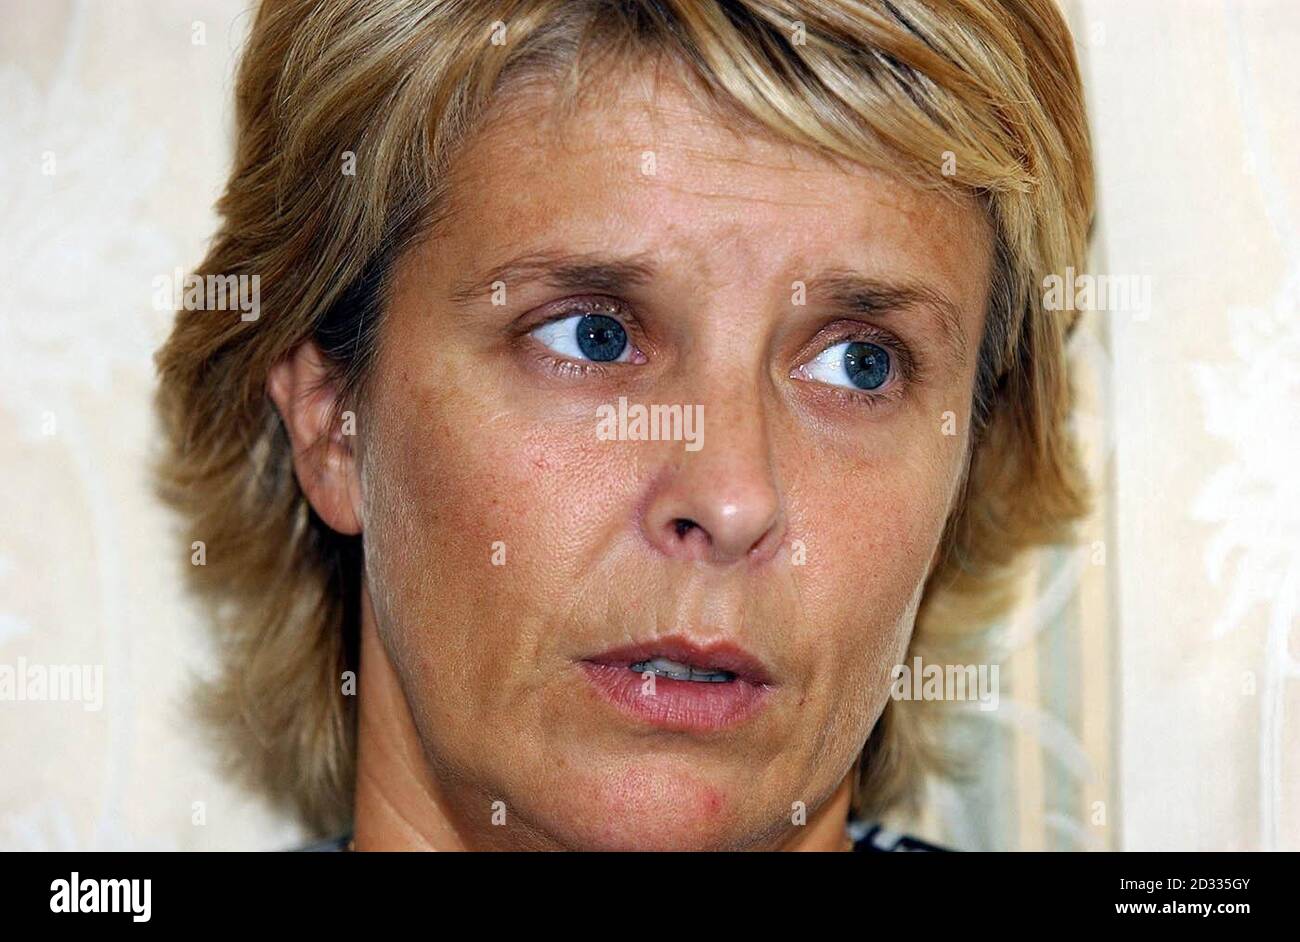 Karen Lamprey, the mother of runaway teenager Ashley Lamprey, at her home in Ackworth, West Yorkshire, Thursday September 4, 2003.  Ashley and Natasha Phillips, 12, from Newport, Isle of Wight, are believed to have run away together on Tuesday after falling in love when they met on holiday in Greece. Police believe the pair had been planning to meet up for several weeks and could be in the Northampton area. The families of both youngsters made emotional appeals for the pair to let them know they were safe and well.   Stock Photo